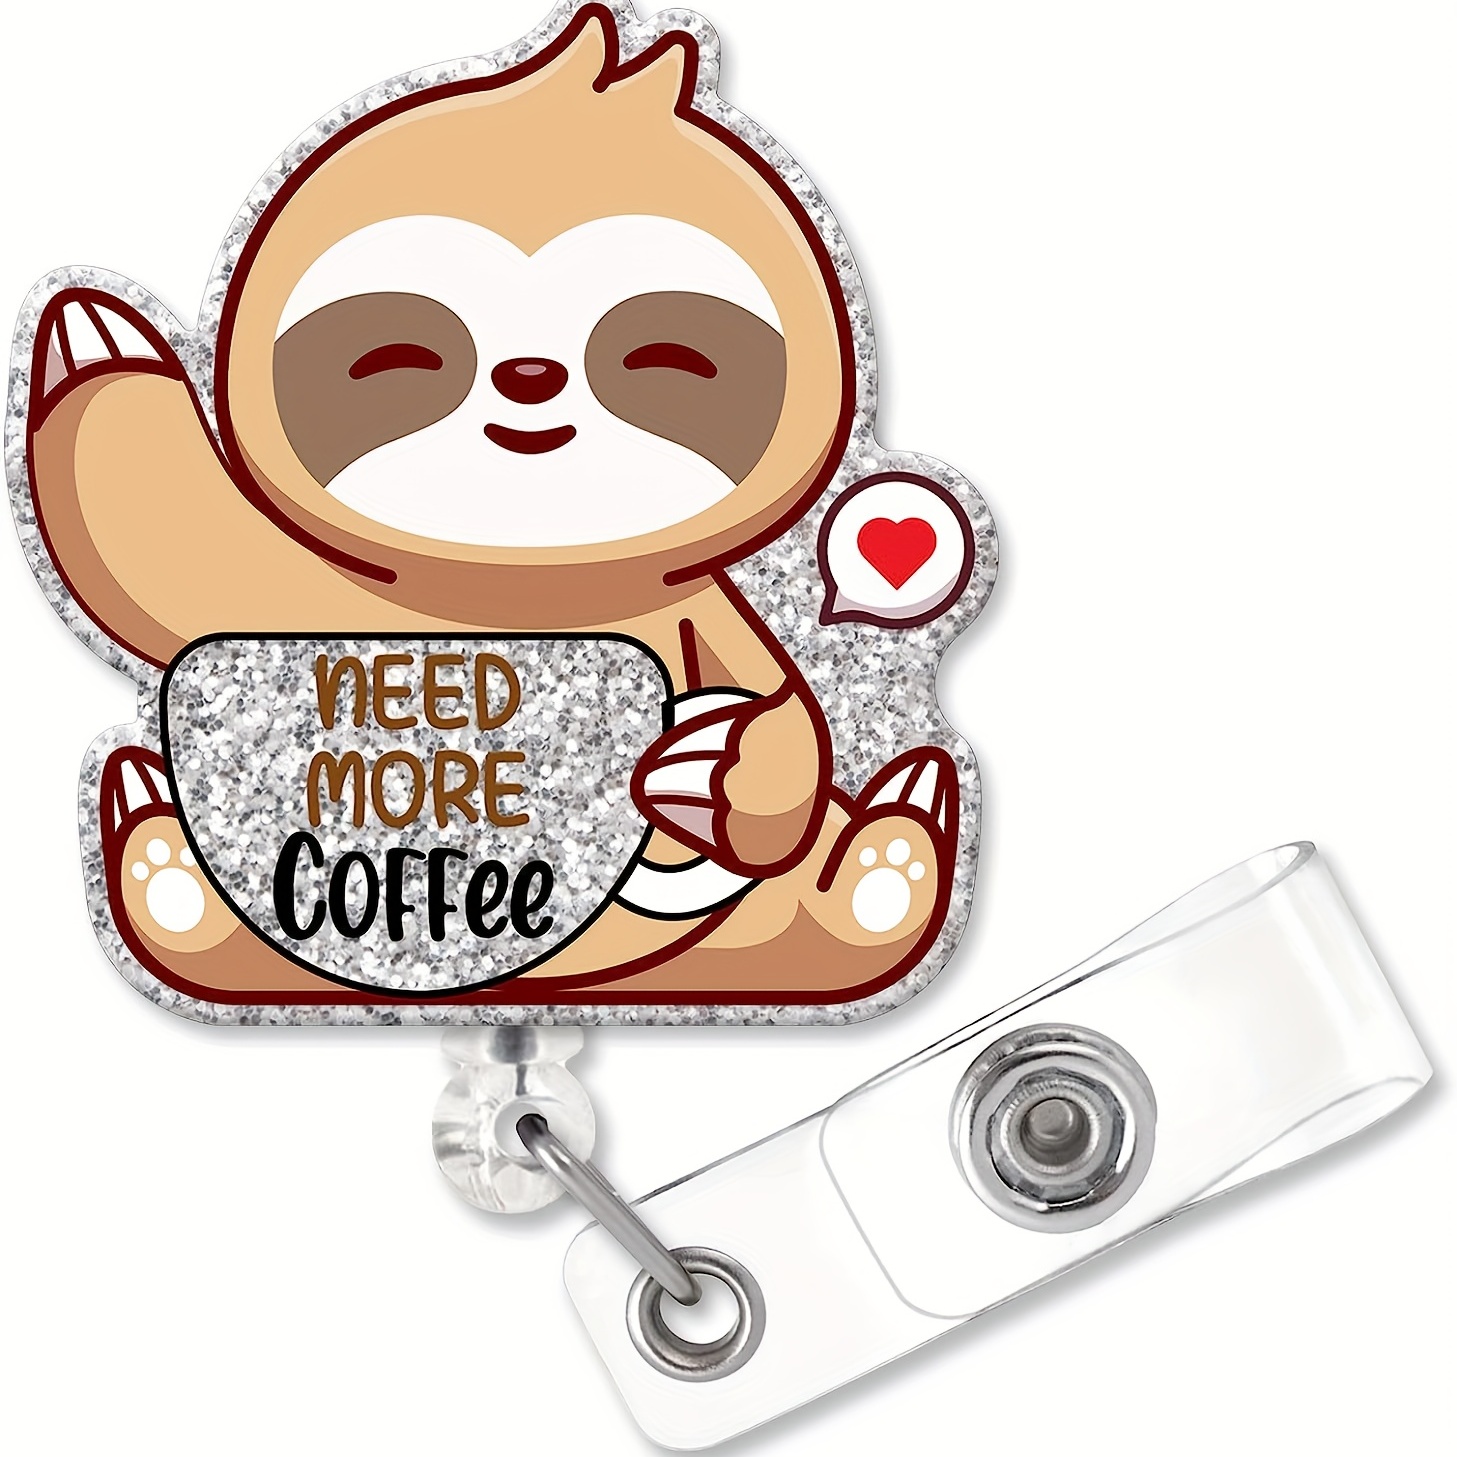 ZBCFSCSB Need More Coffee Funny Shaped Badge Reel Holder with Metal Shark Clip, Office Hospital Lab Work ID Tag, Badge Gift for Nurse, Gift for